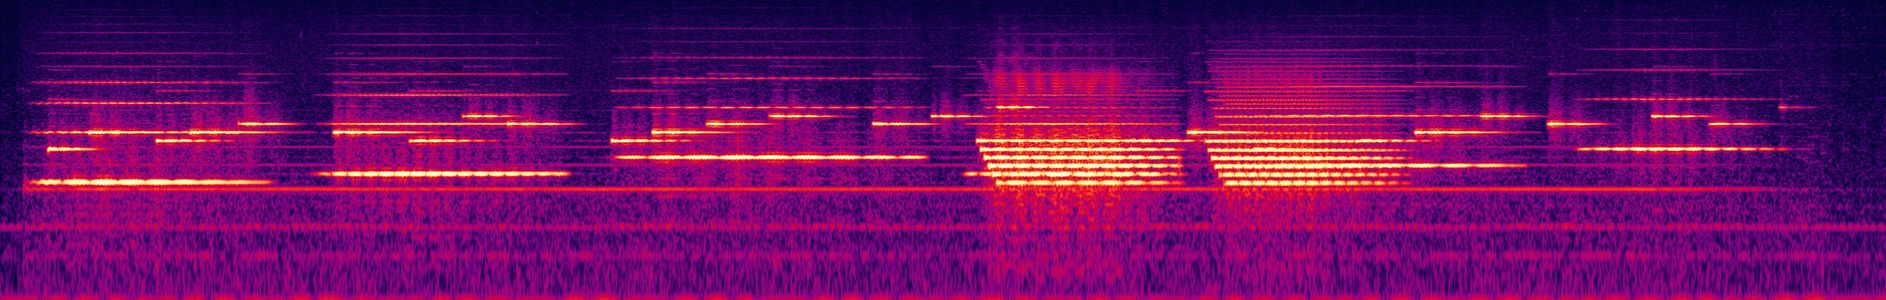 Time On Our Hands - Spectrogram.jpg